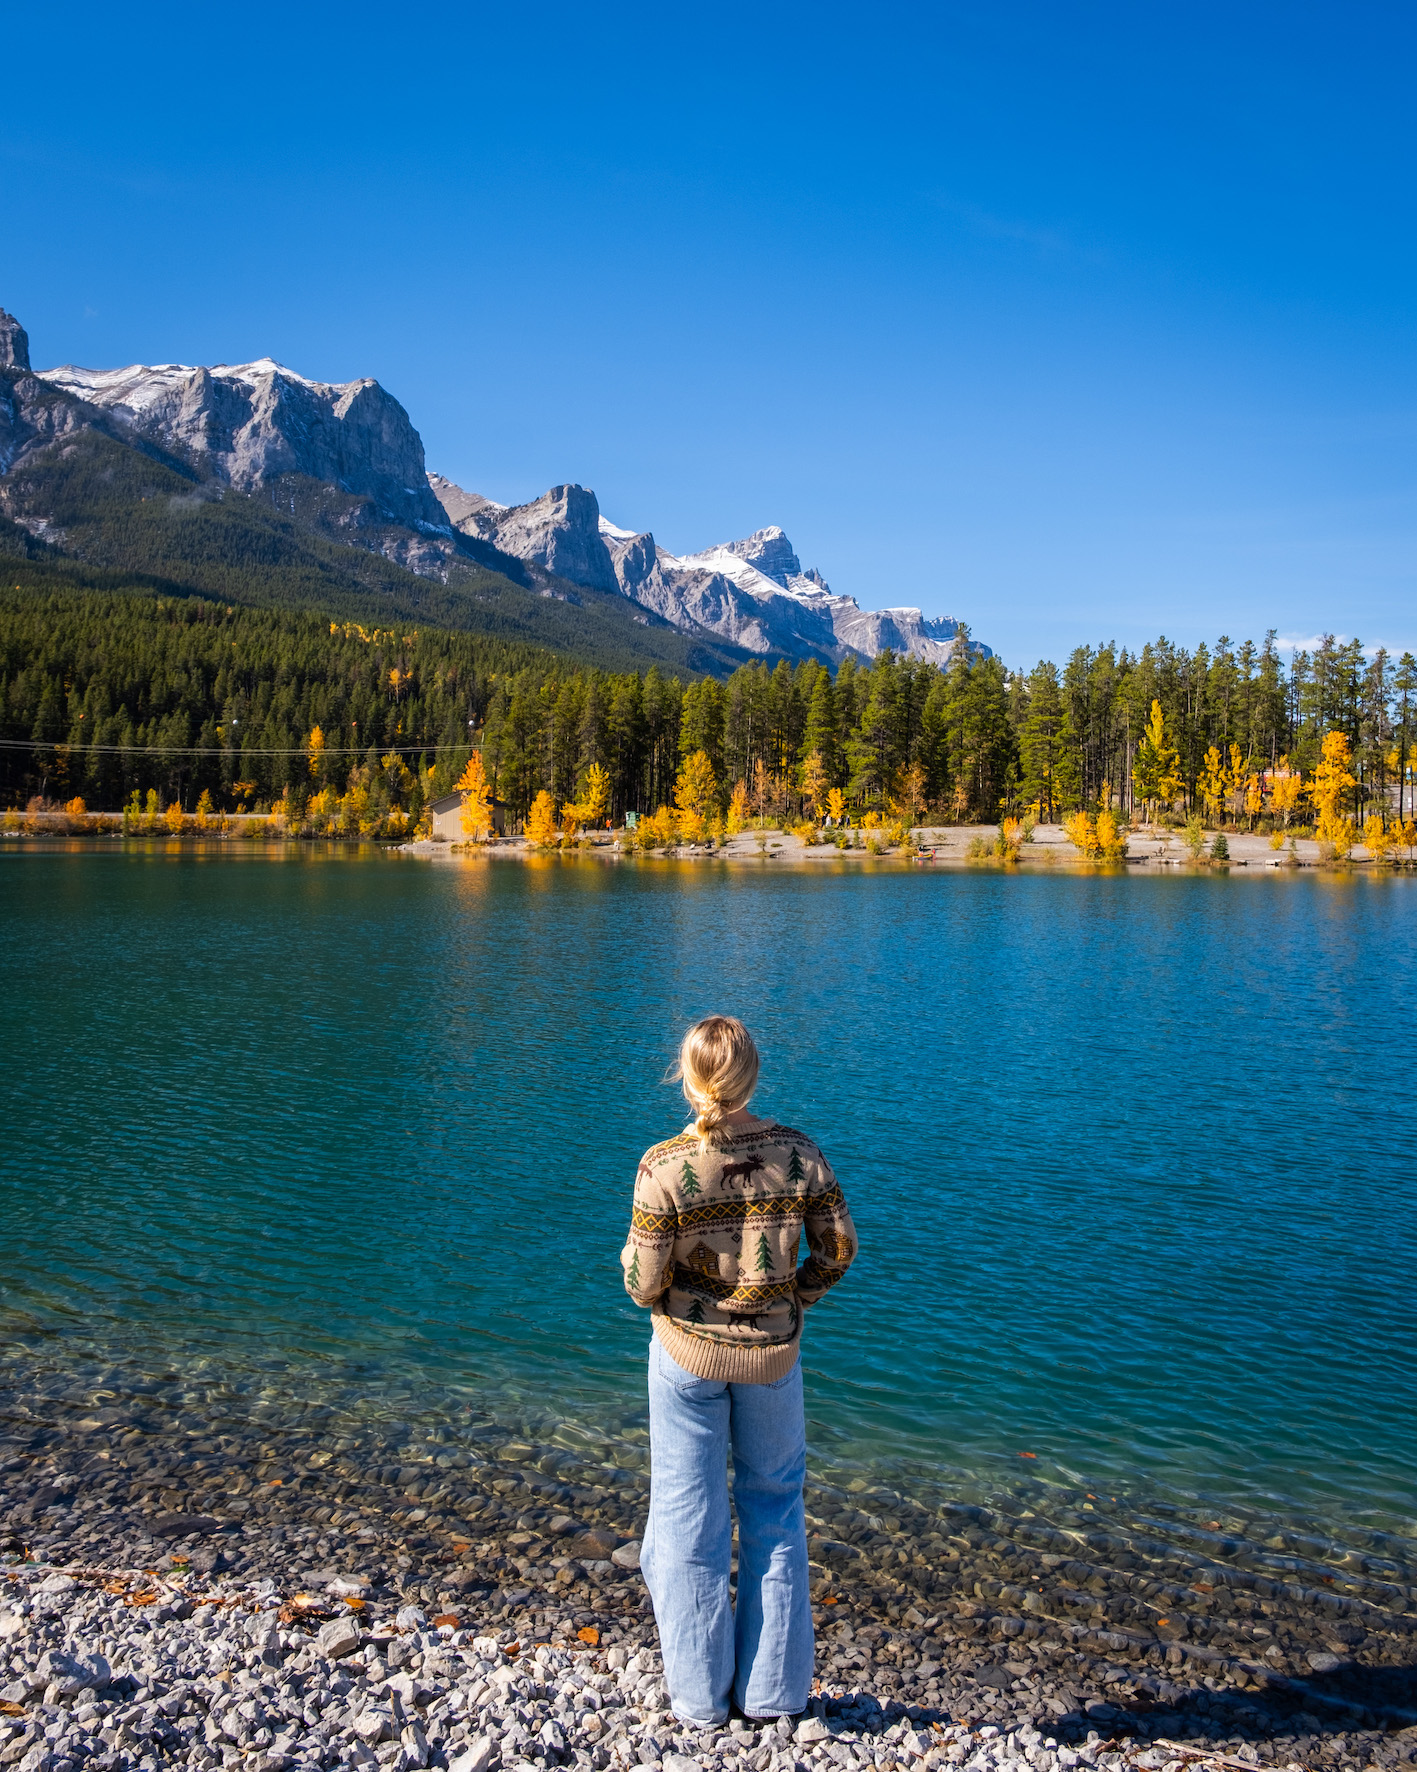 The Canmore Reservoir in Early October